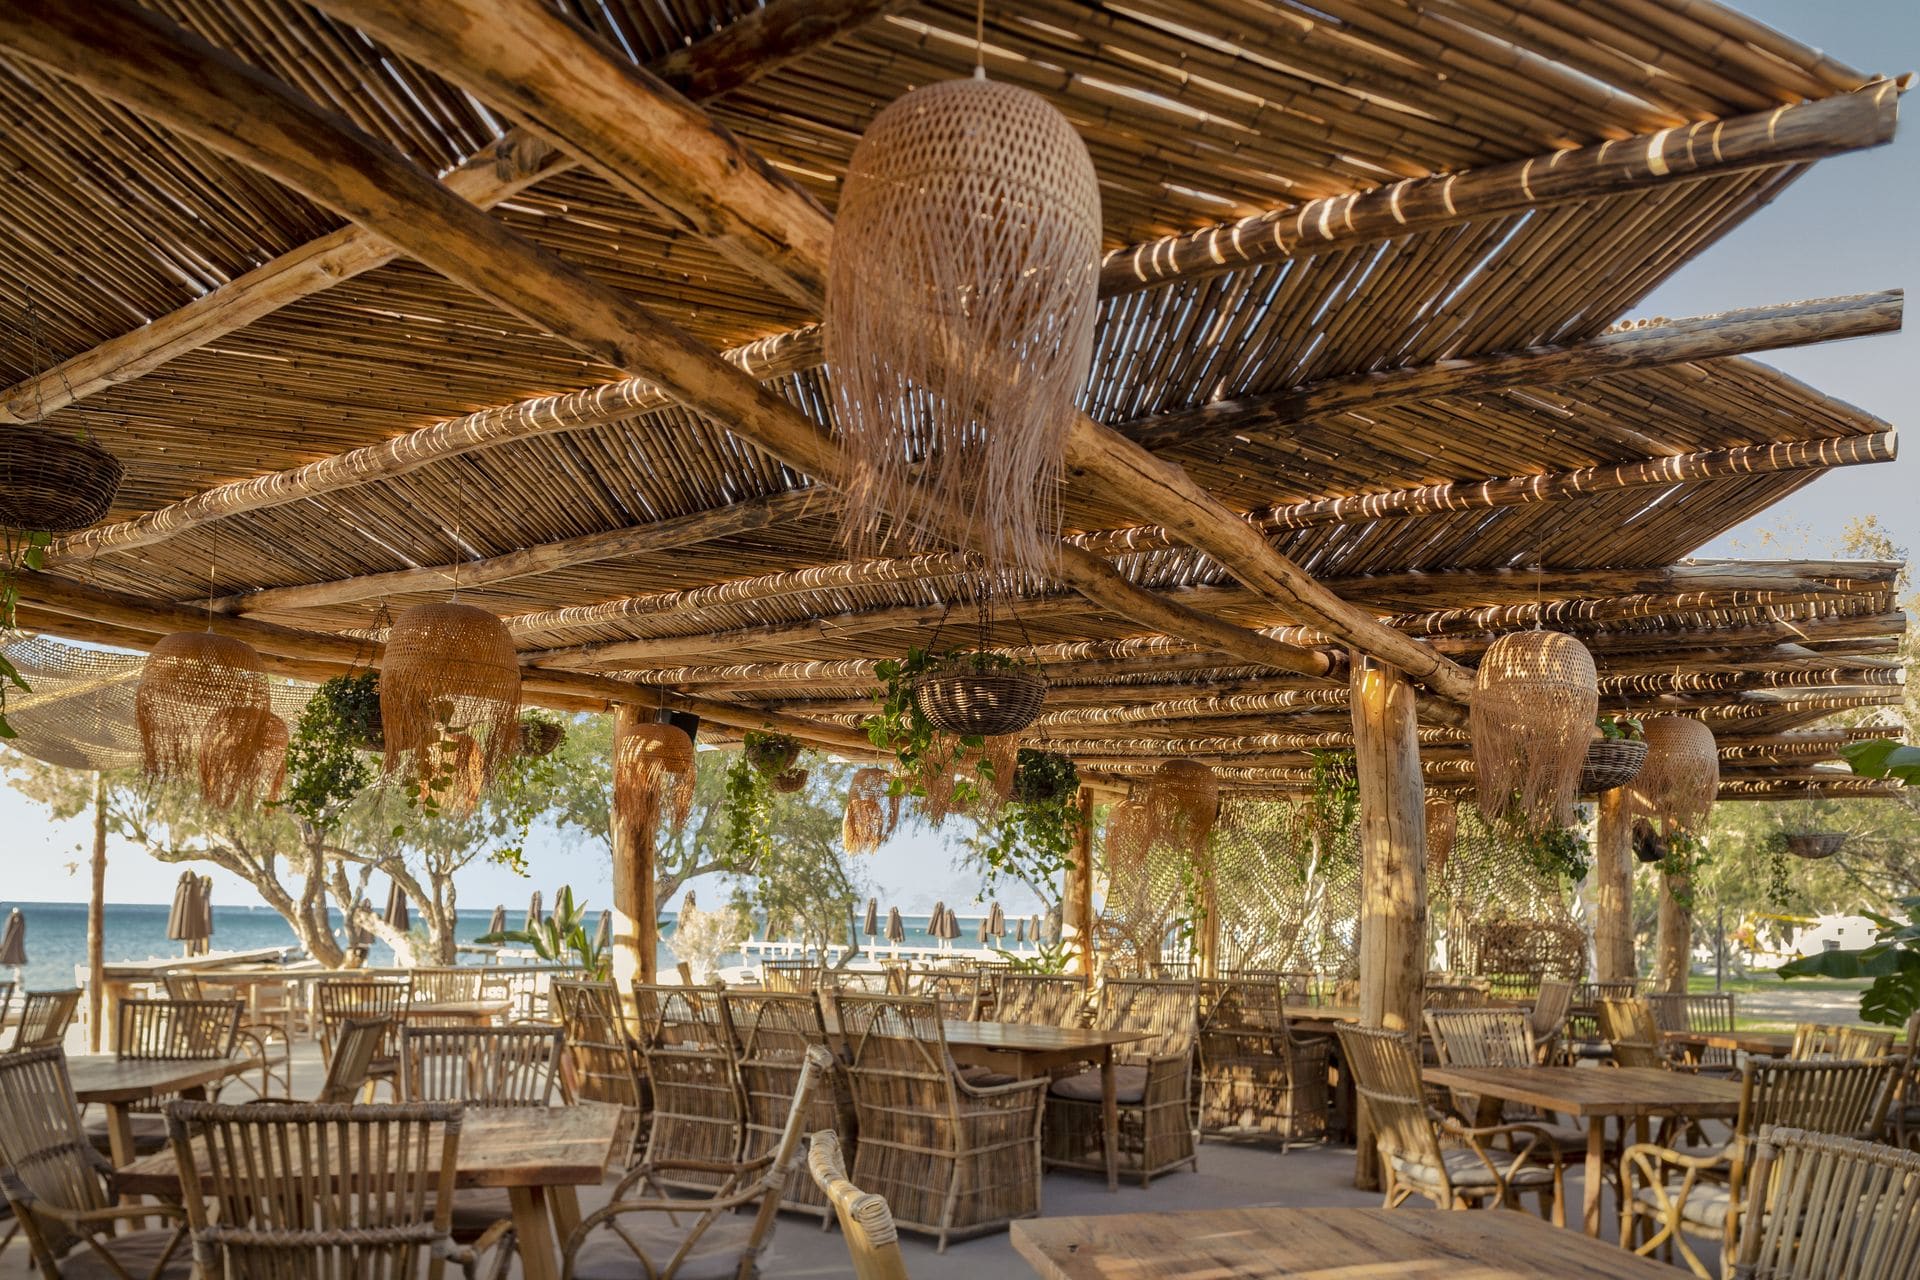 Asterias Seaside Bear Bar is part of the facilities of our luxury hotels in Samos